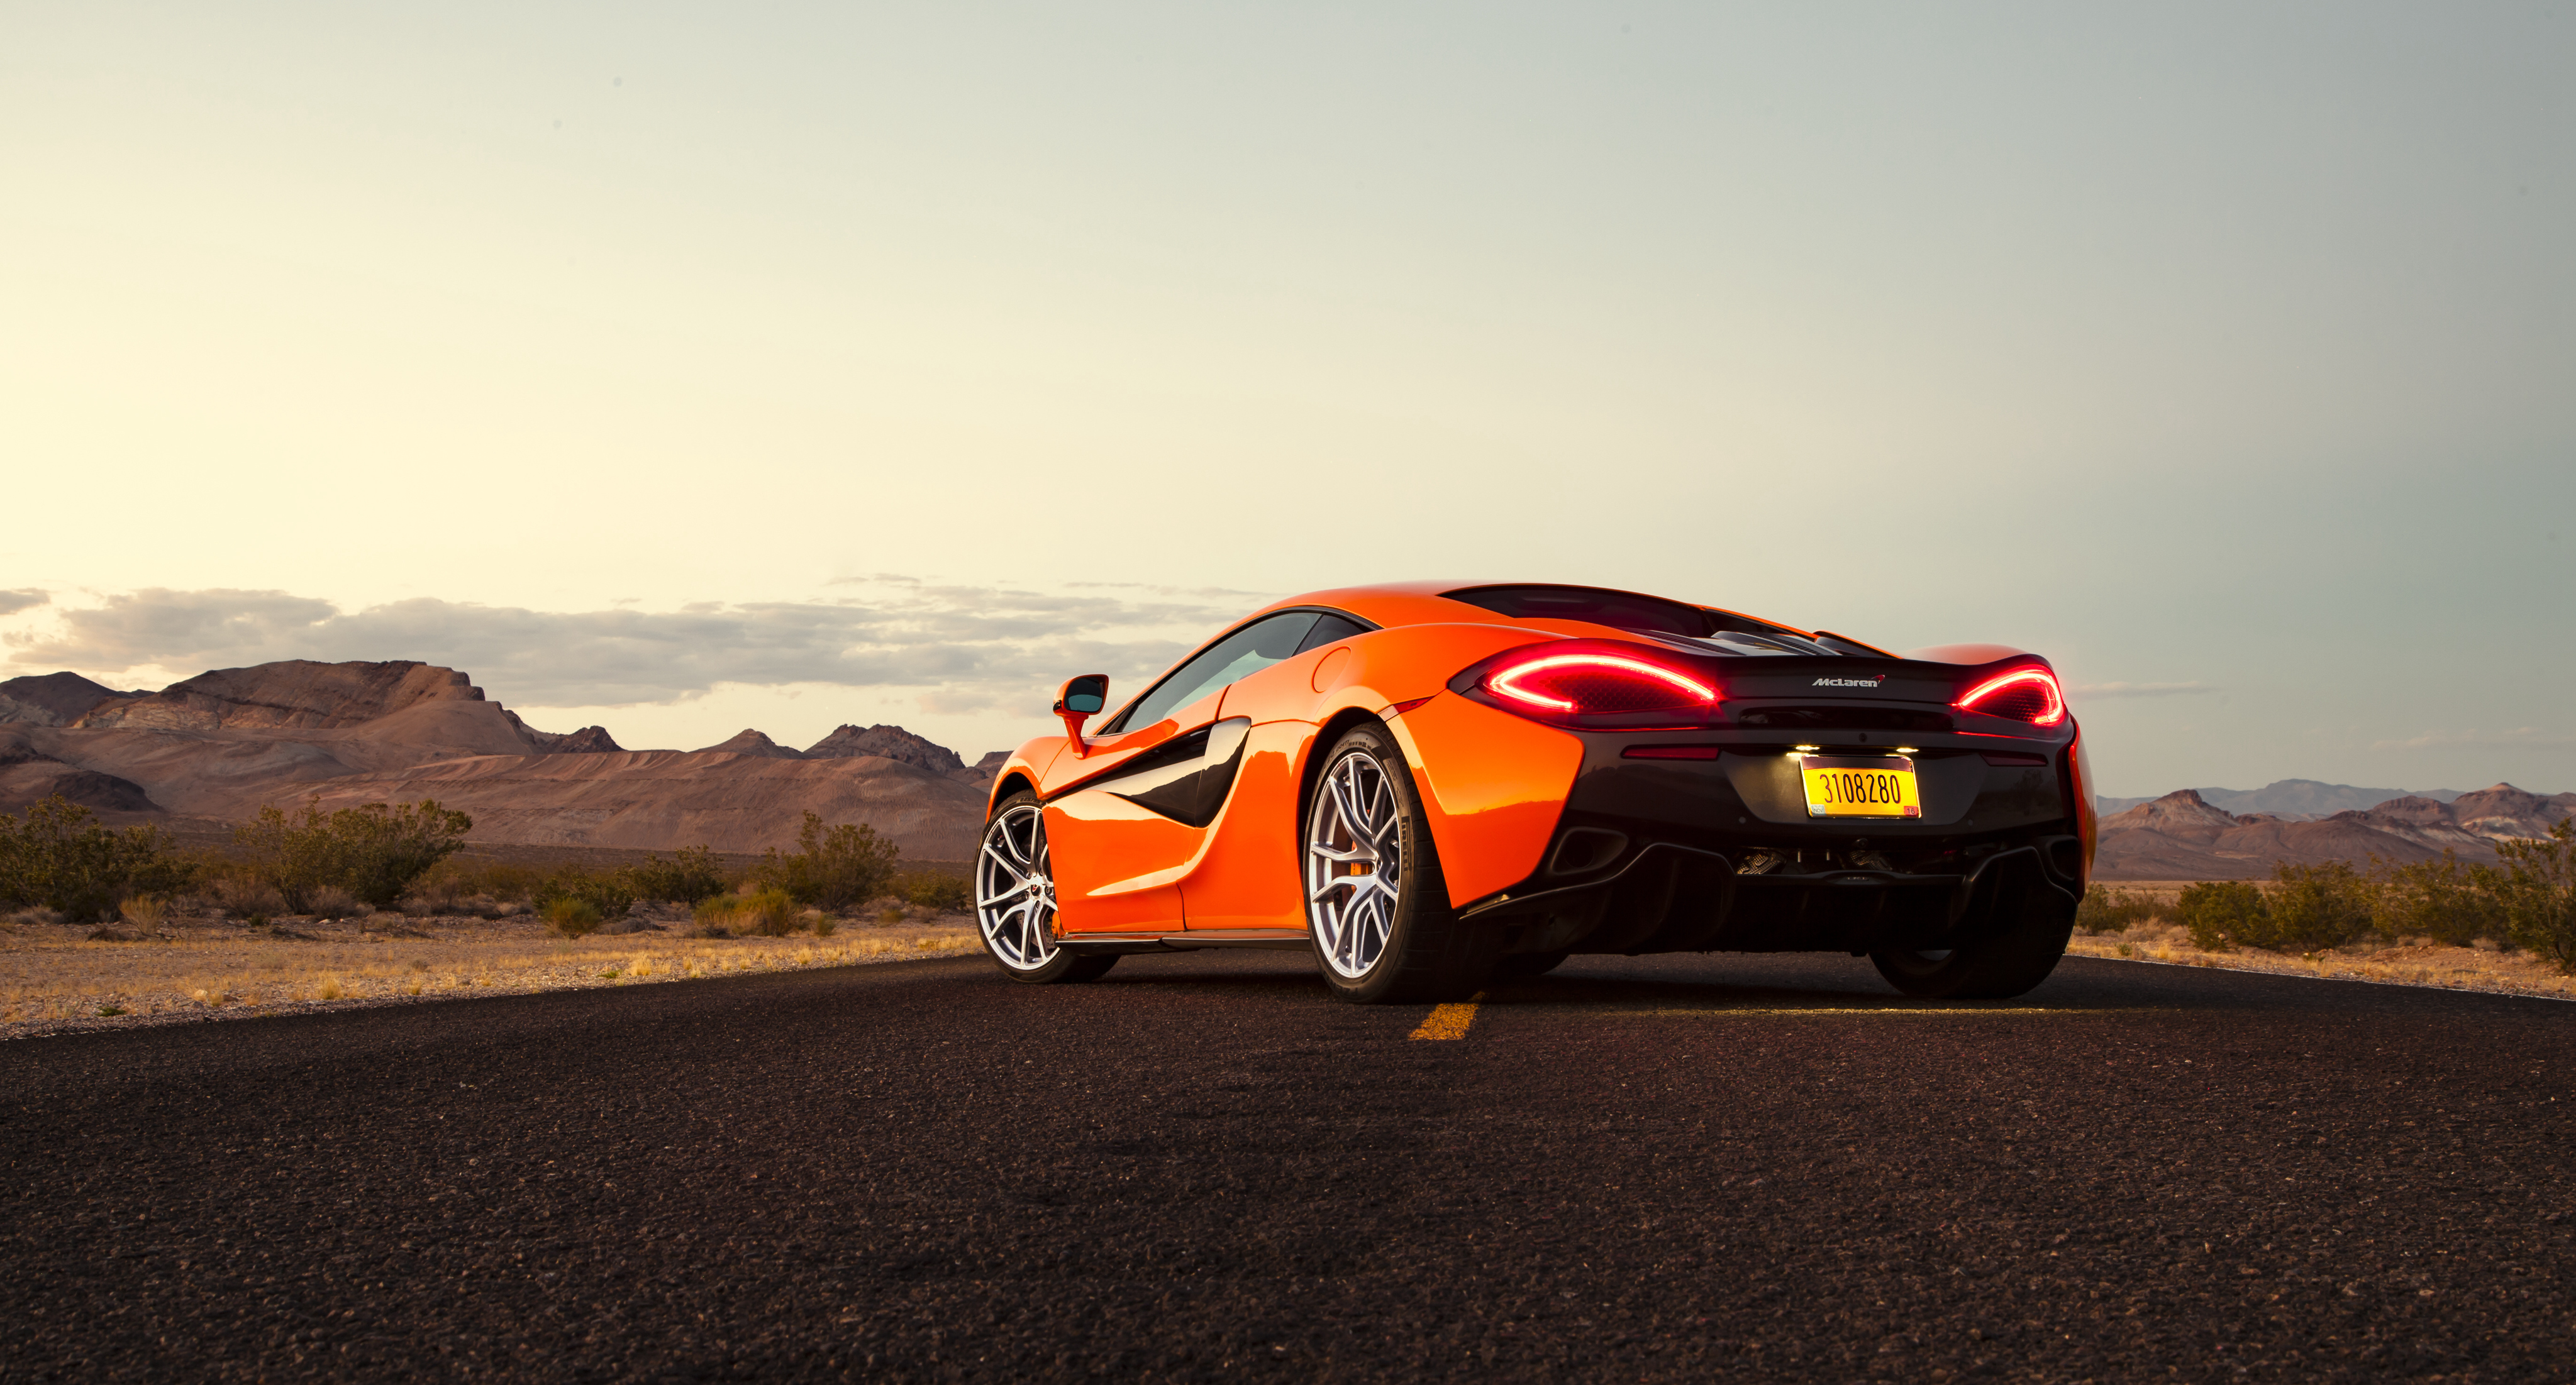 108718 Screensavers and Wallpapers Supercar for phone. Download supercar, sports, mclaren, cars, road, asphalt, sports car, mclaren 570 pictures for free